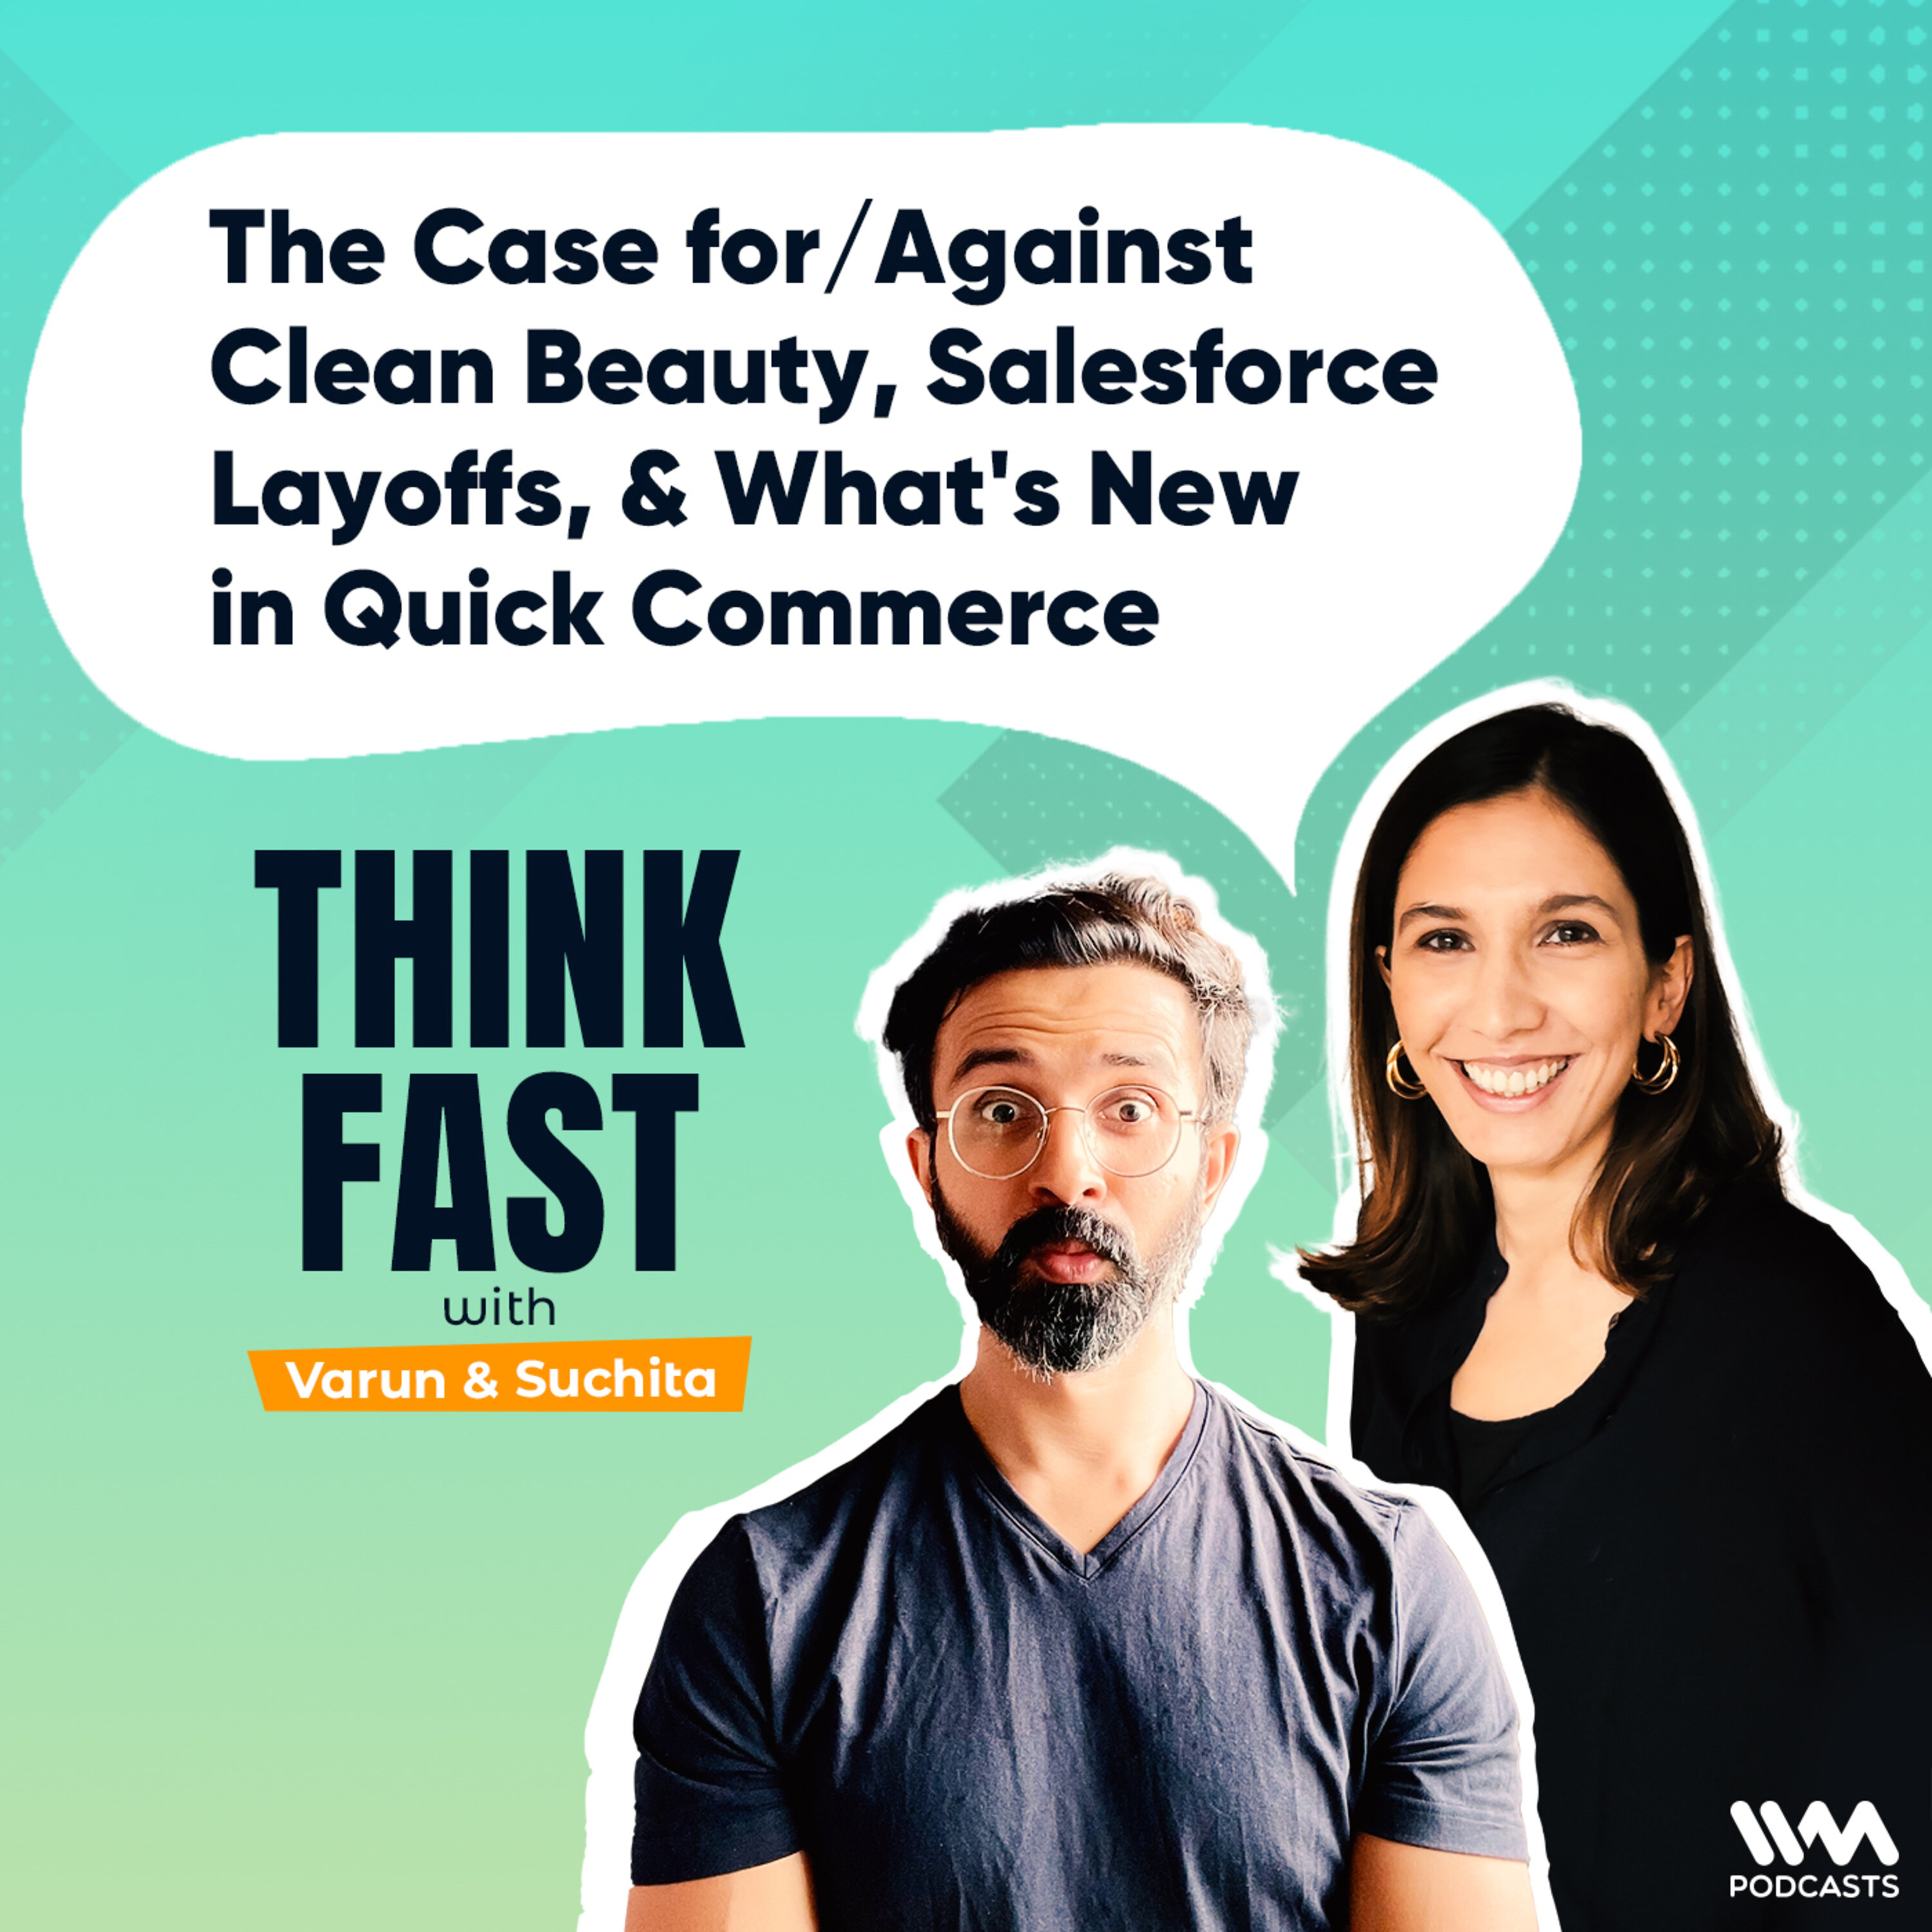 The case for/against Clean Beauty, Salesforce Layoffs, and What's new in Quick Commerce